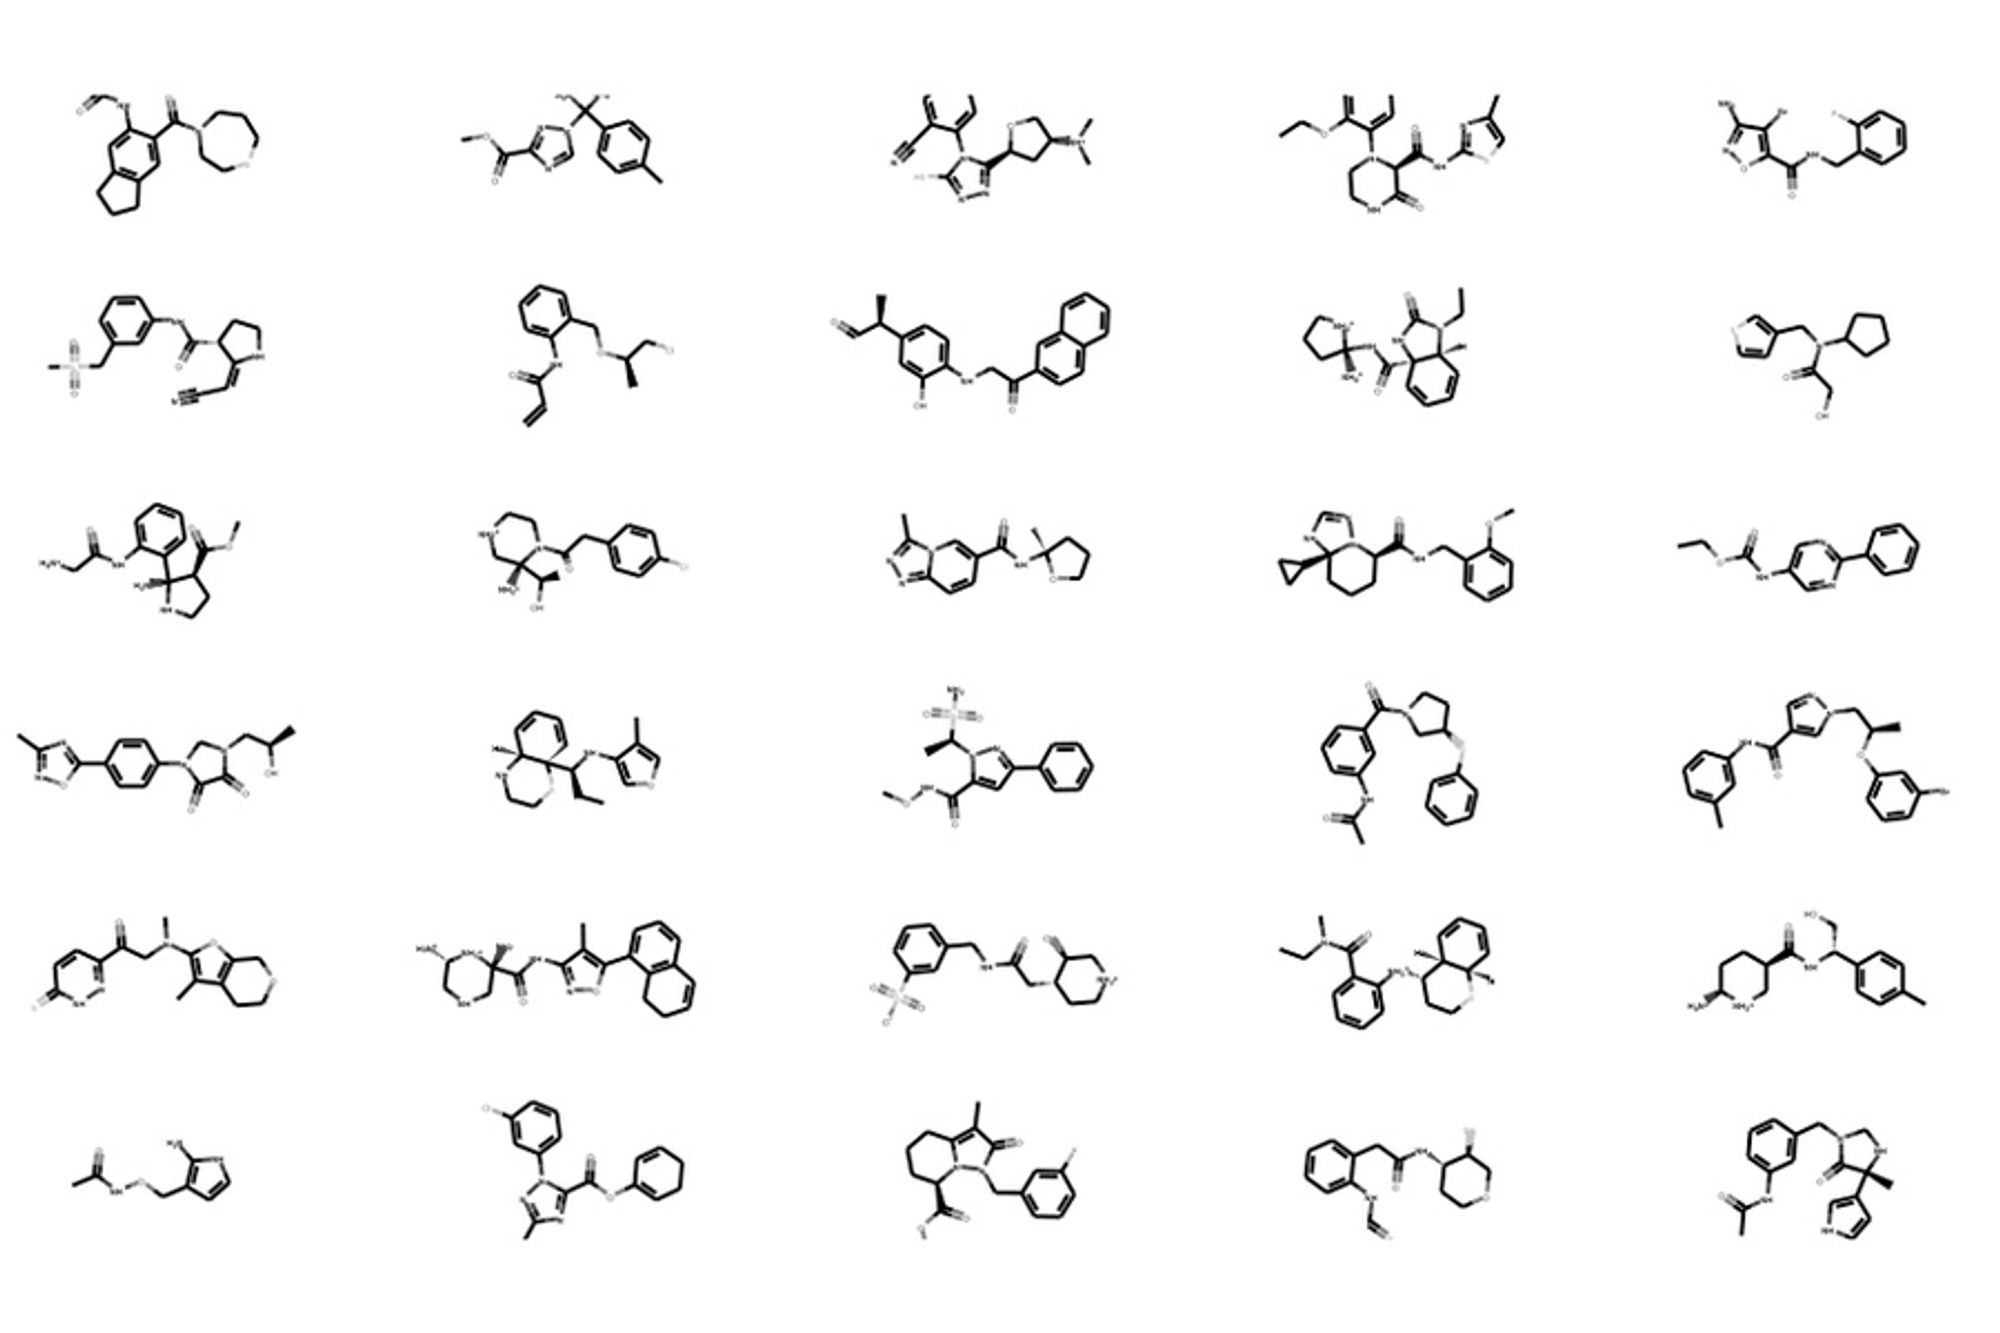 Papers with Code - Molecular Property Prediction